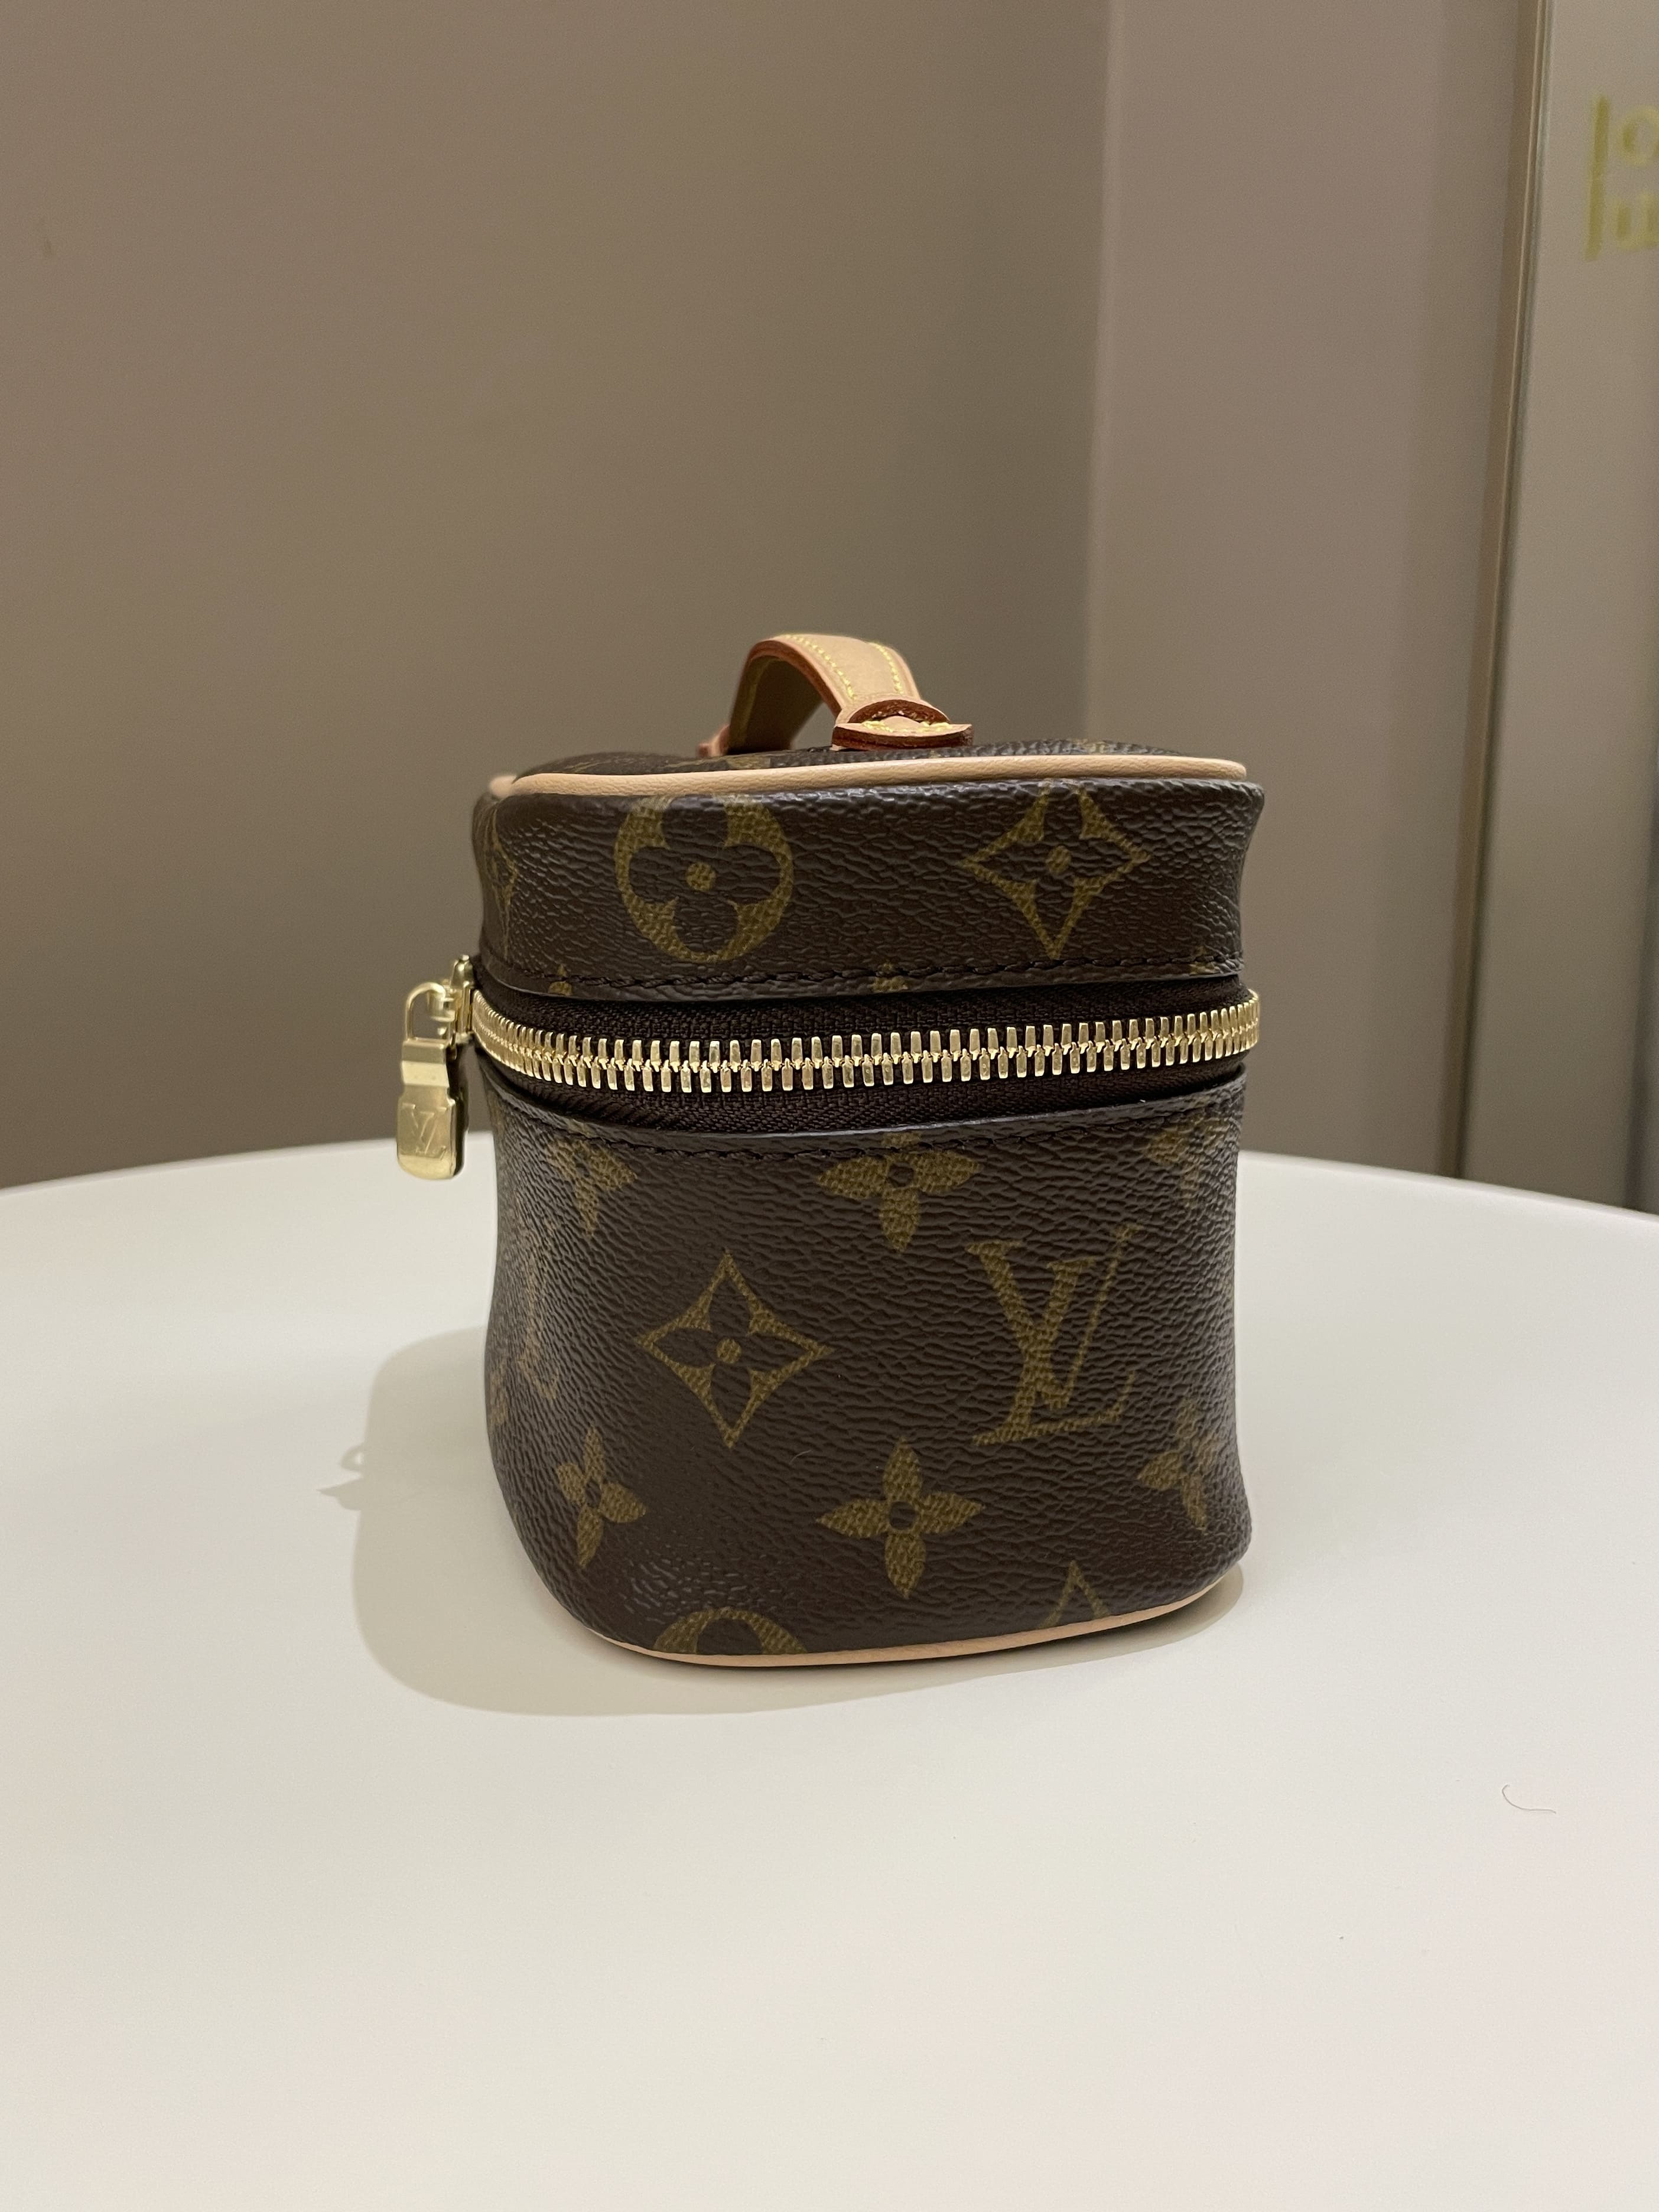 Louis Vuitton Monogram Nice Nano Toiletry Pouch - Brown Cosmetic Bags,  Accessories - LOU778455